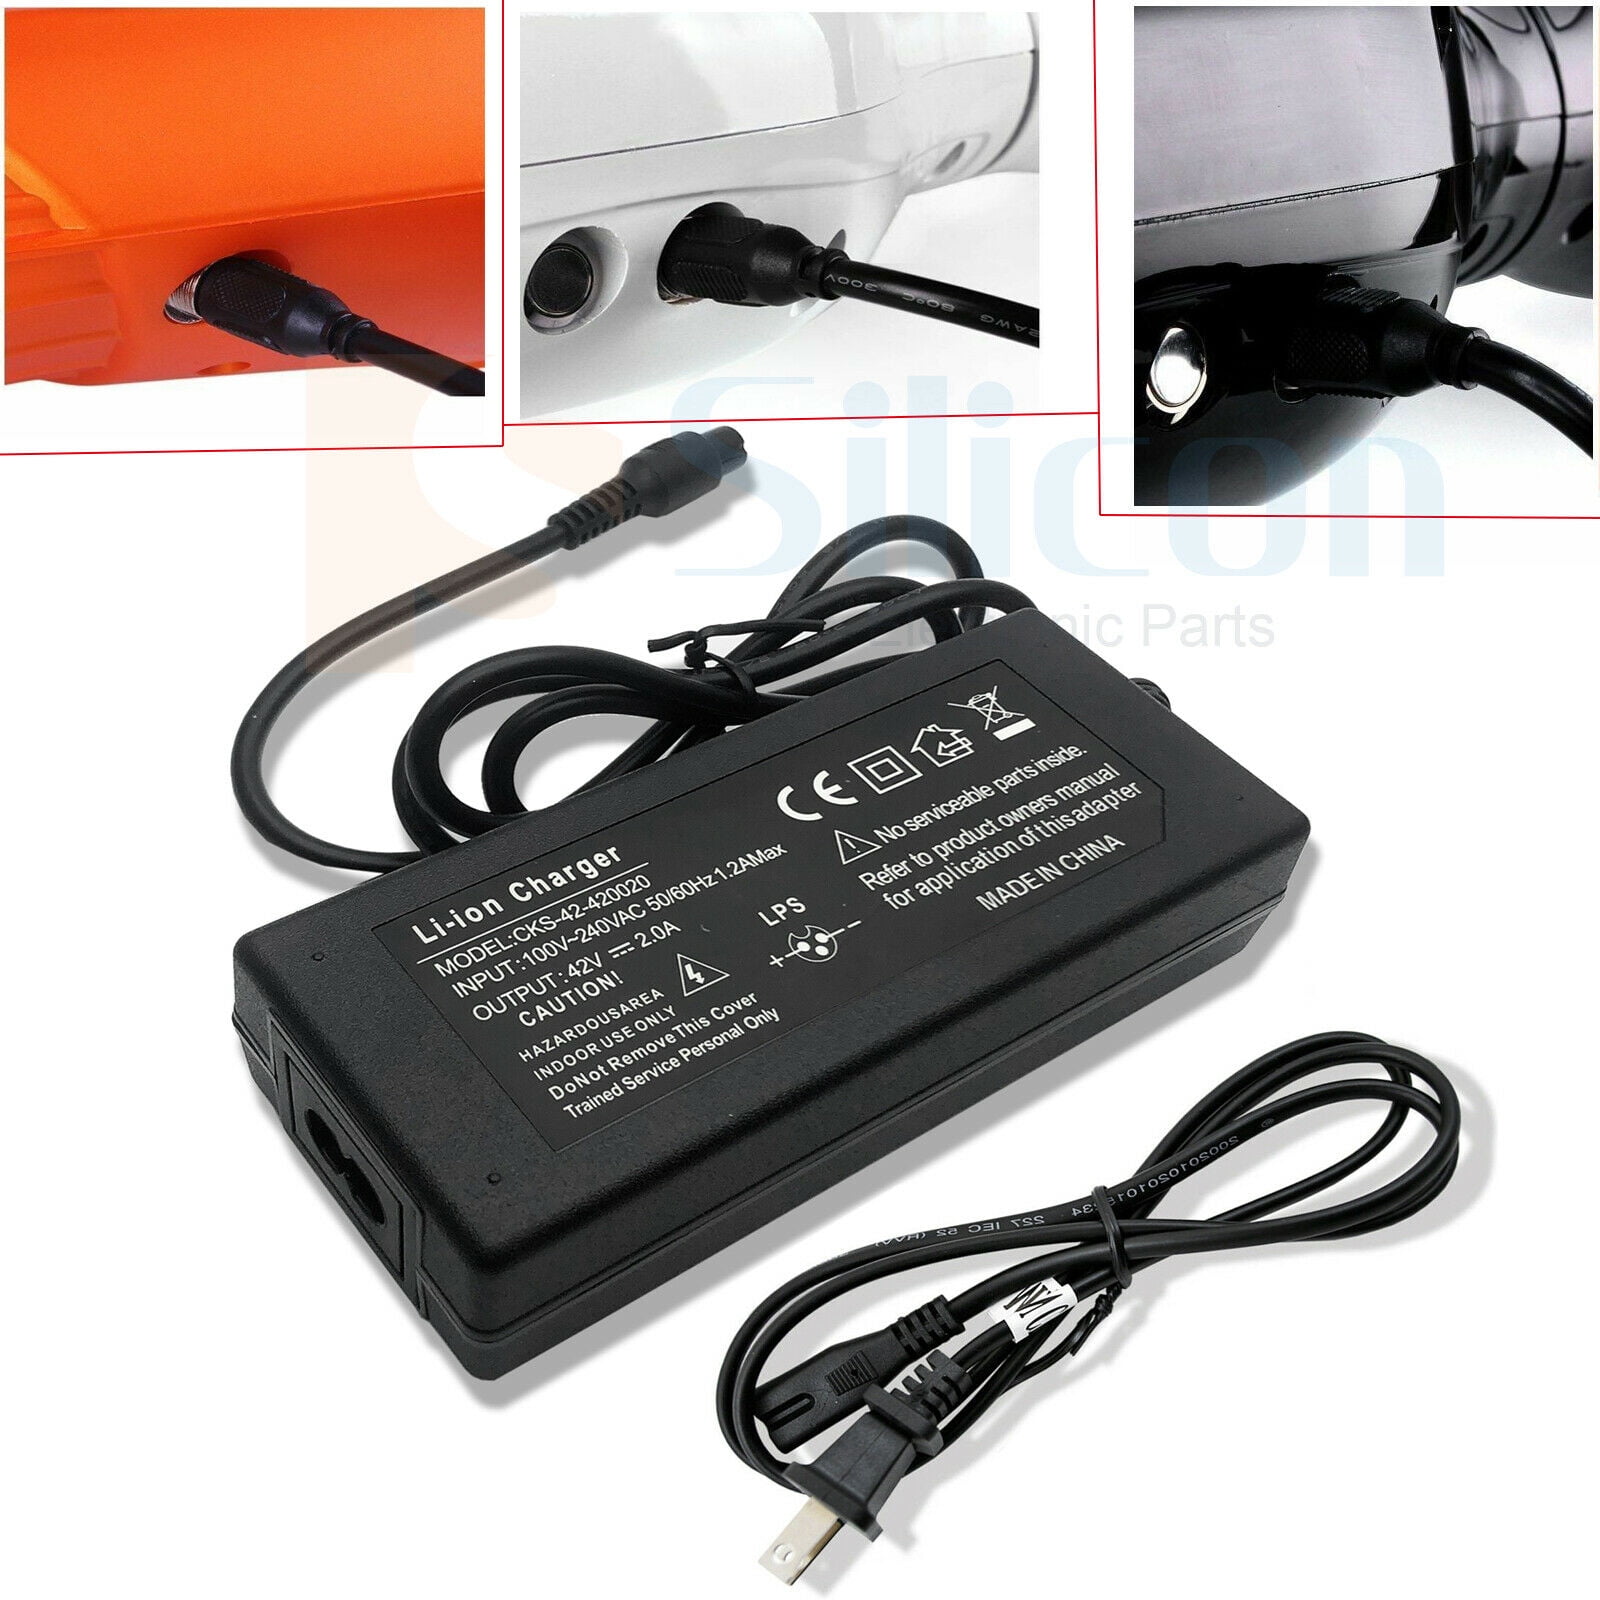 12 Volt Charger for Power Wheels W4473 X6642 Y8409 Barbie Jammin Jeep Wrangler